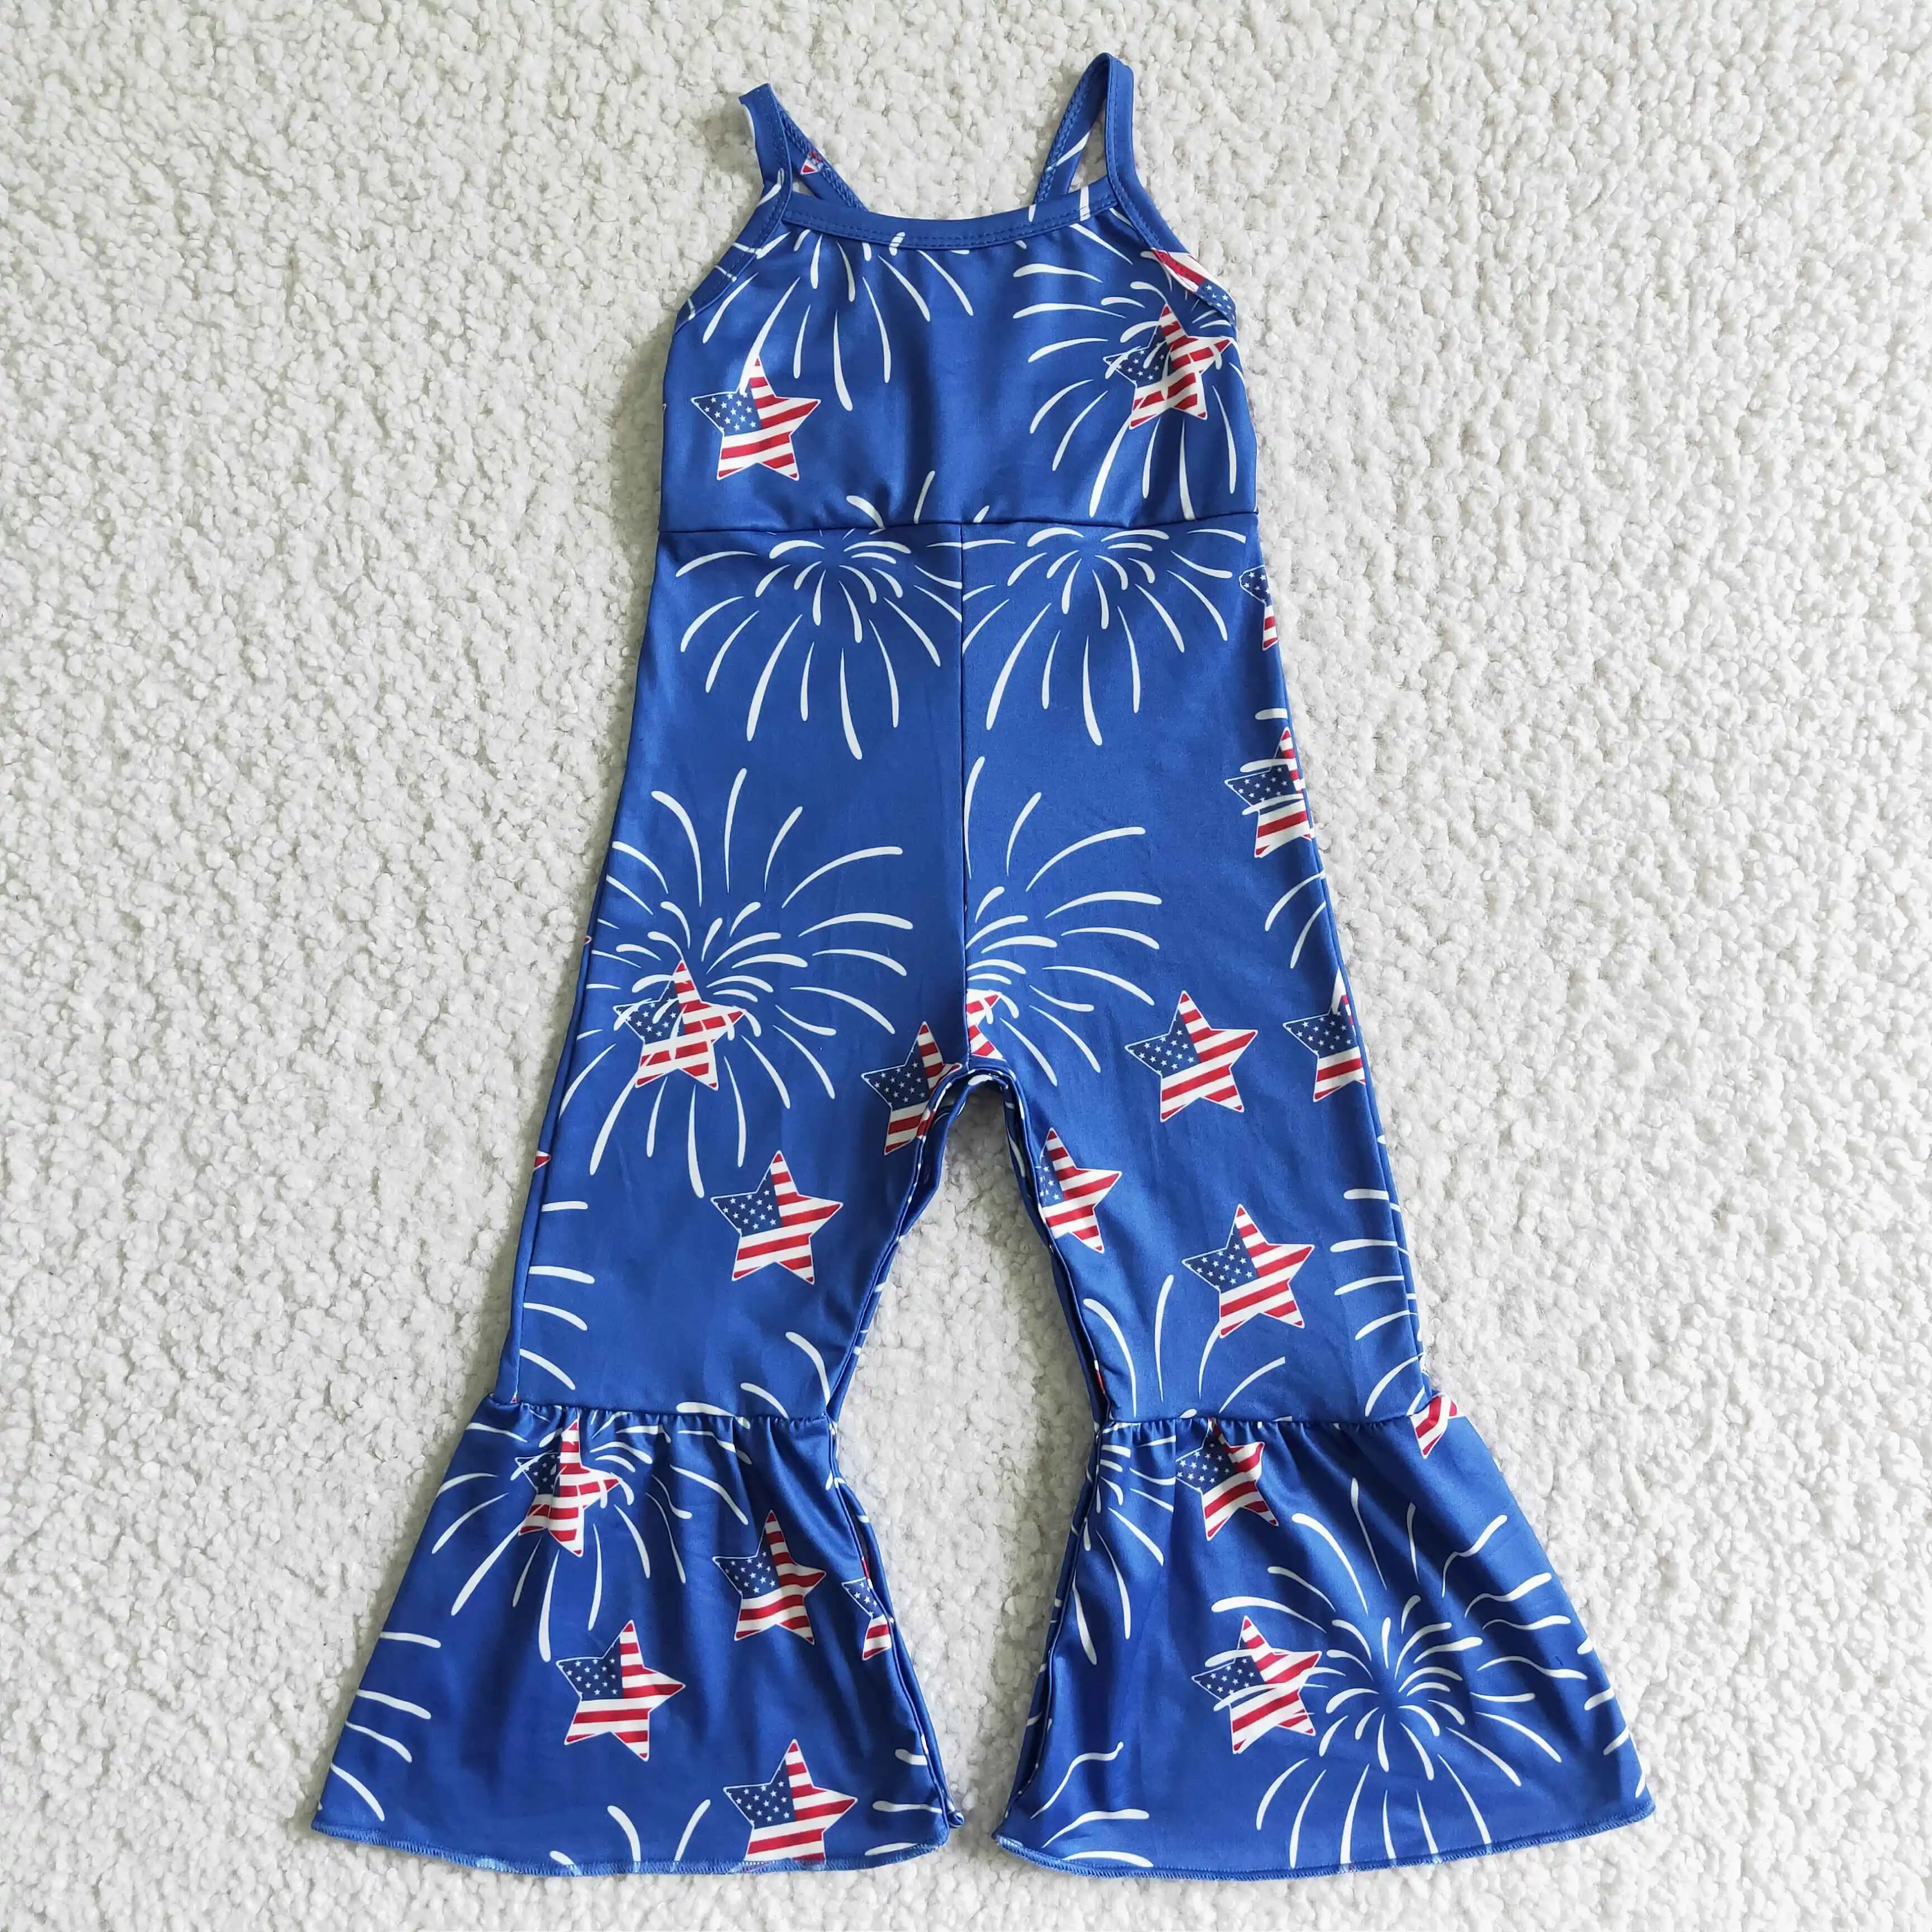 

July 4th fireworks suspenders teenage girls clothing trousers jumpsuit romper summer fashion clothes